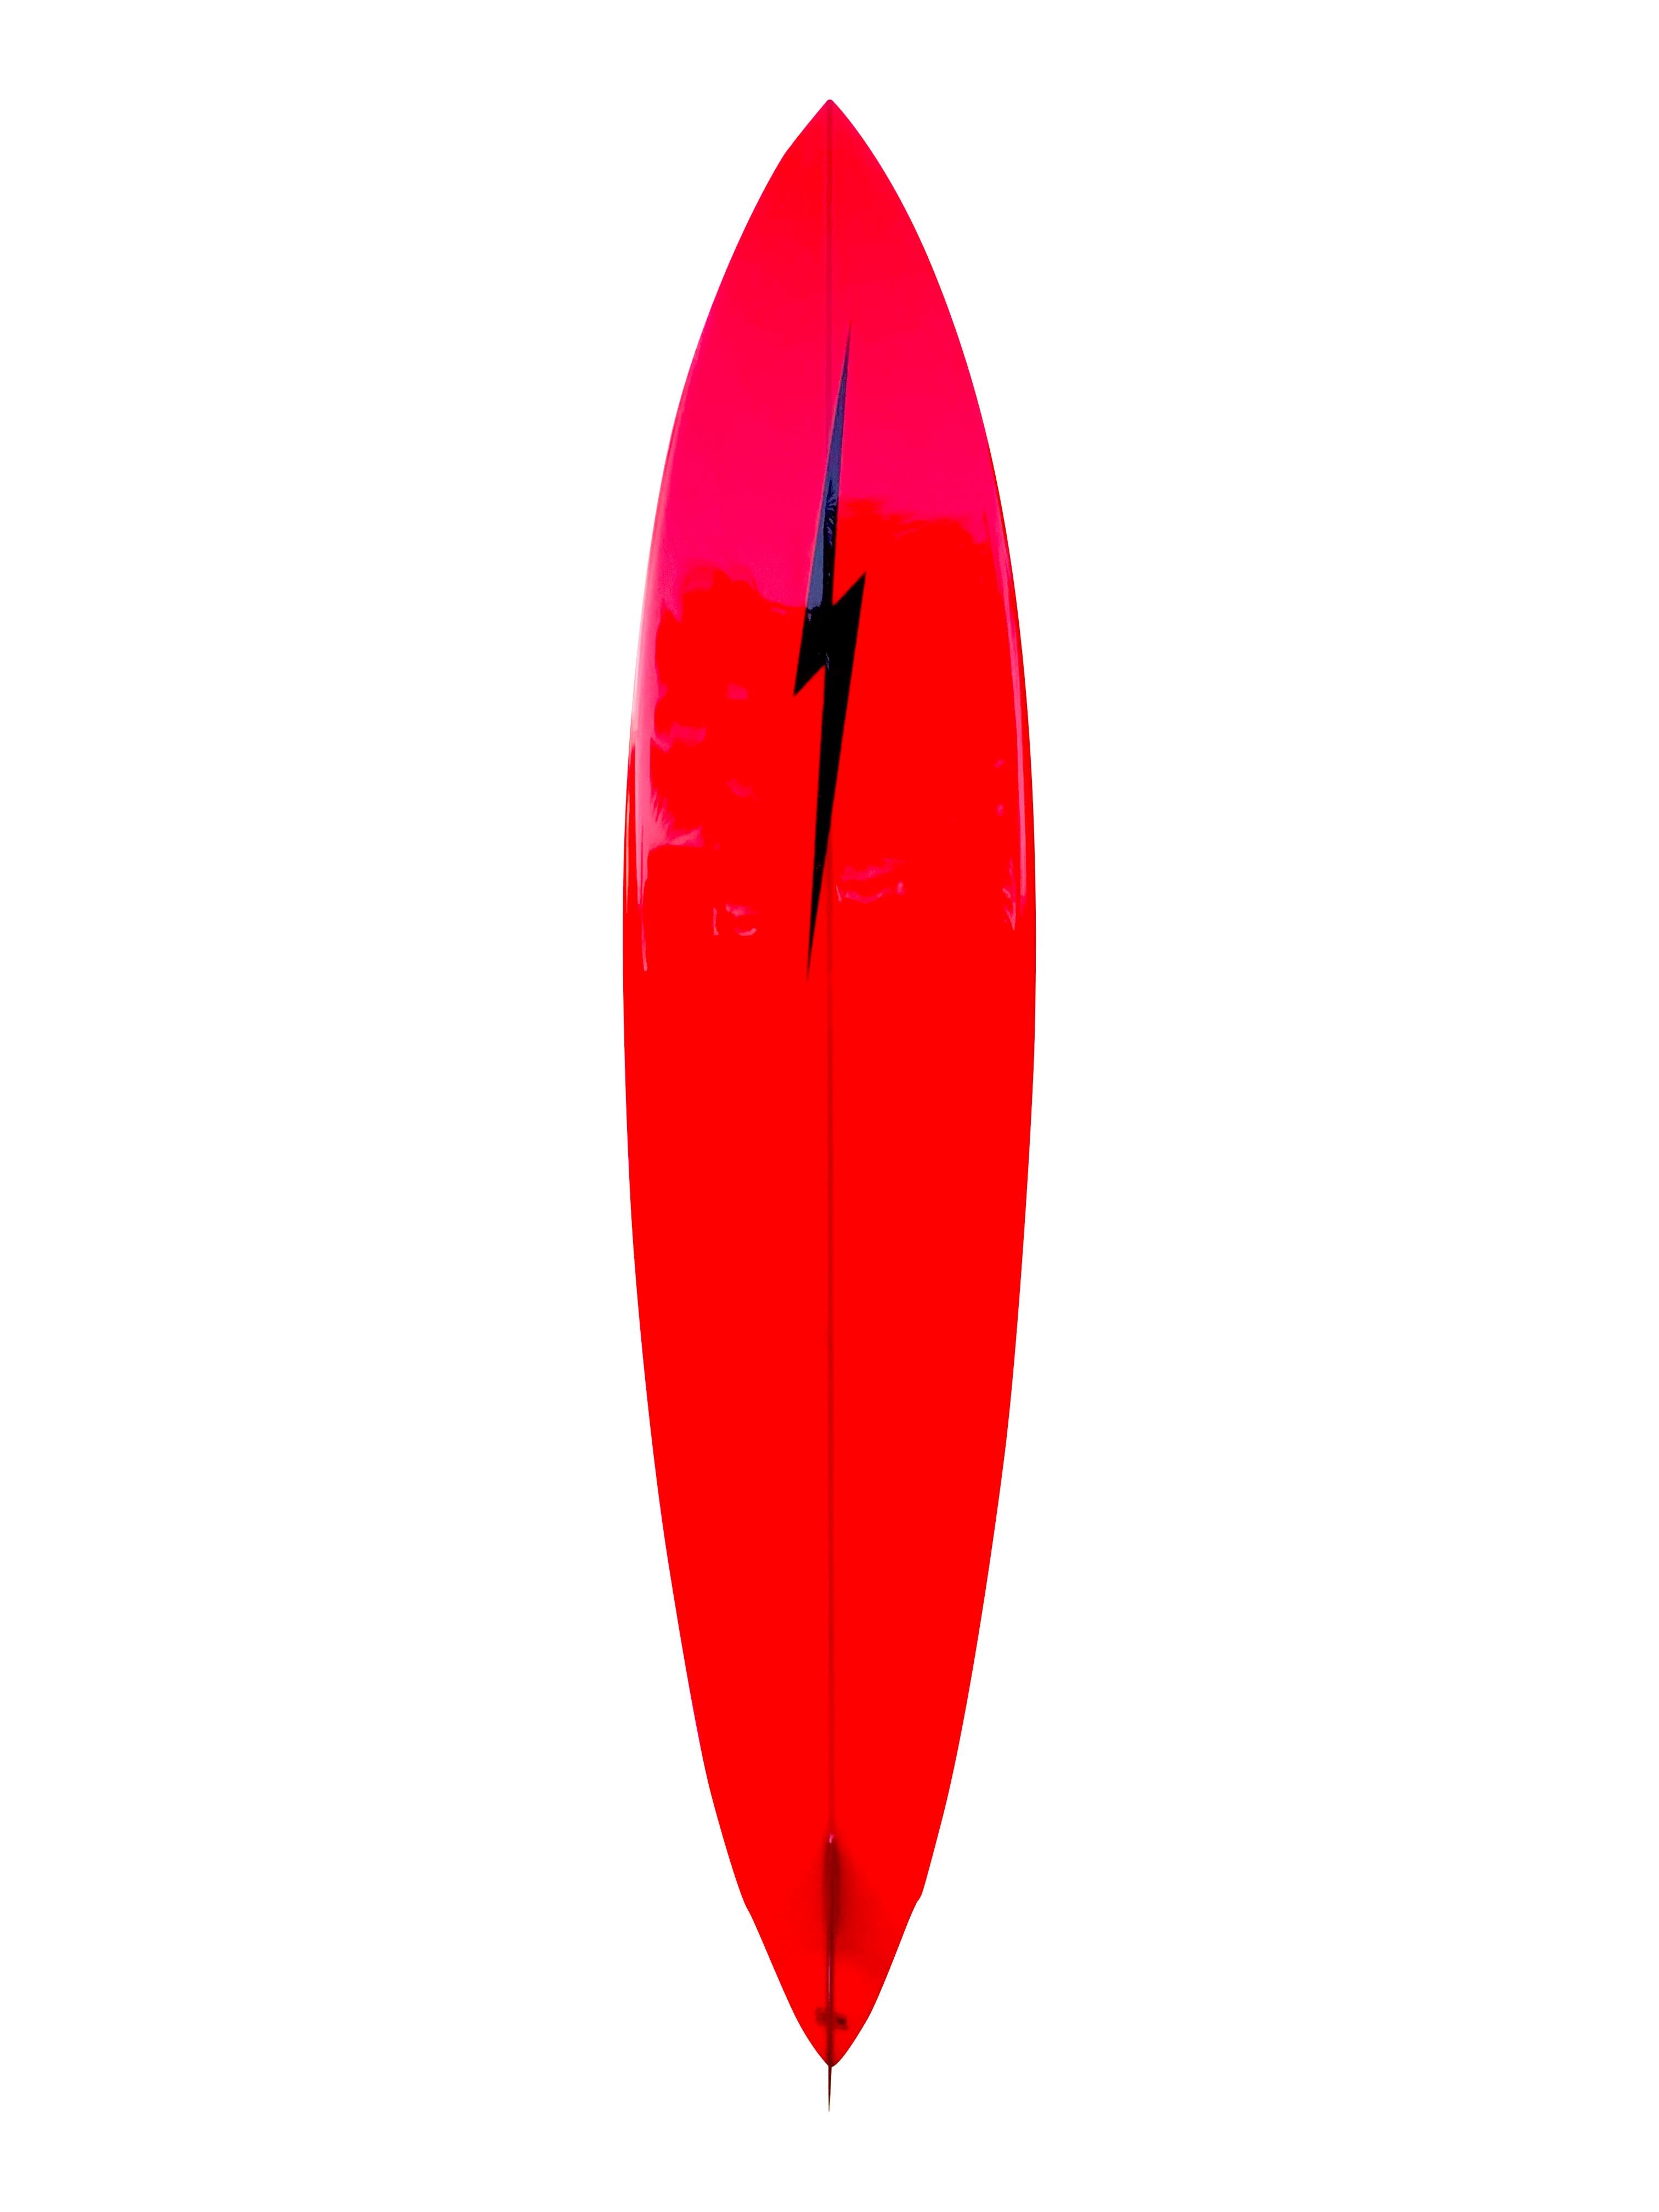 Gerry Lopez shaped Lightning Bolt “Big Wednesday” surfboard. A tribute to the 1978 film “Big Wednesday” featuring Gerry Lopez. Pipeliner shape design with red and orange tints. Shaped by Gerry Lopez aka “Mr. Pipeline”, renowned surfer, board